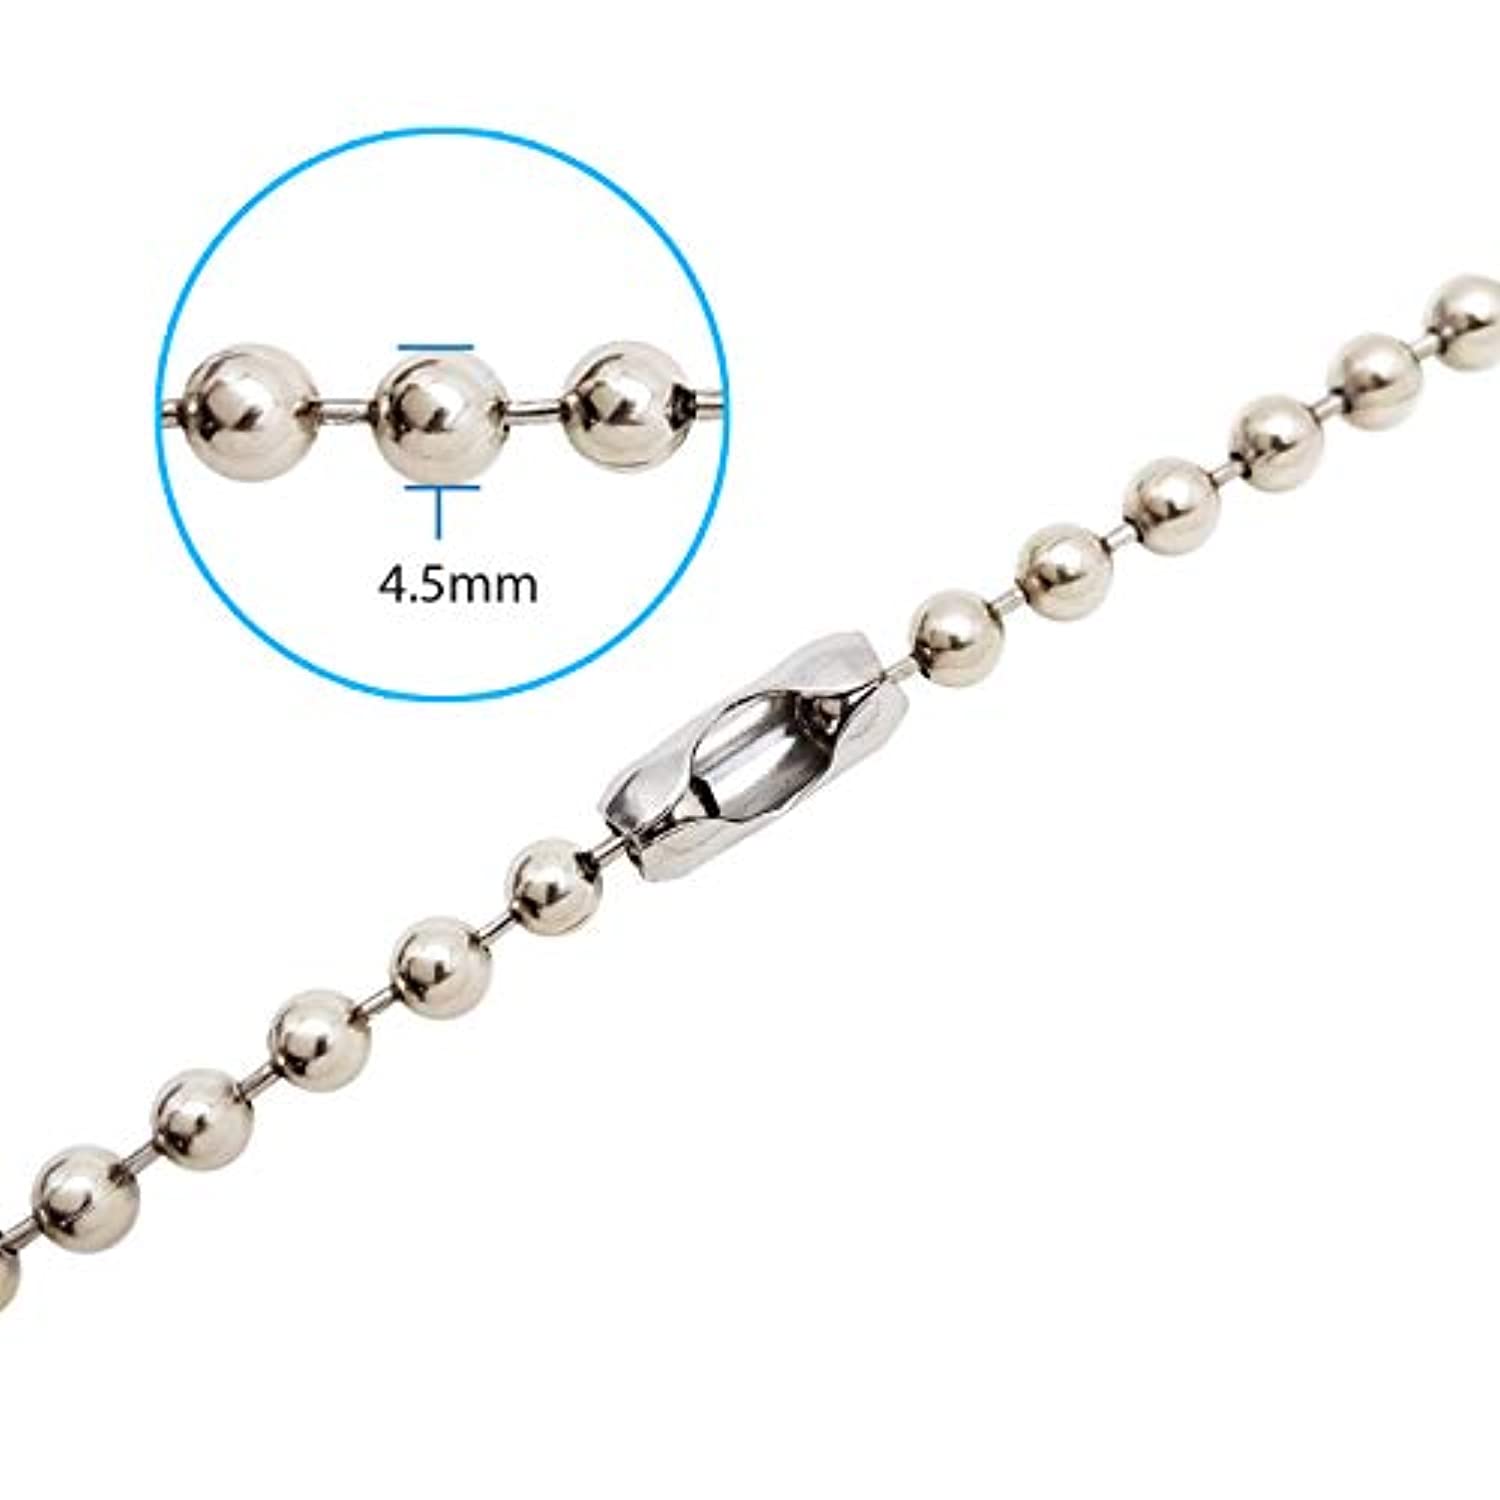 1/2 Pack Beaded Pull Chain Extension with Connector 10 Feet Beaded